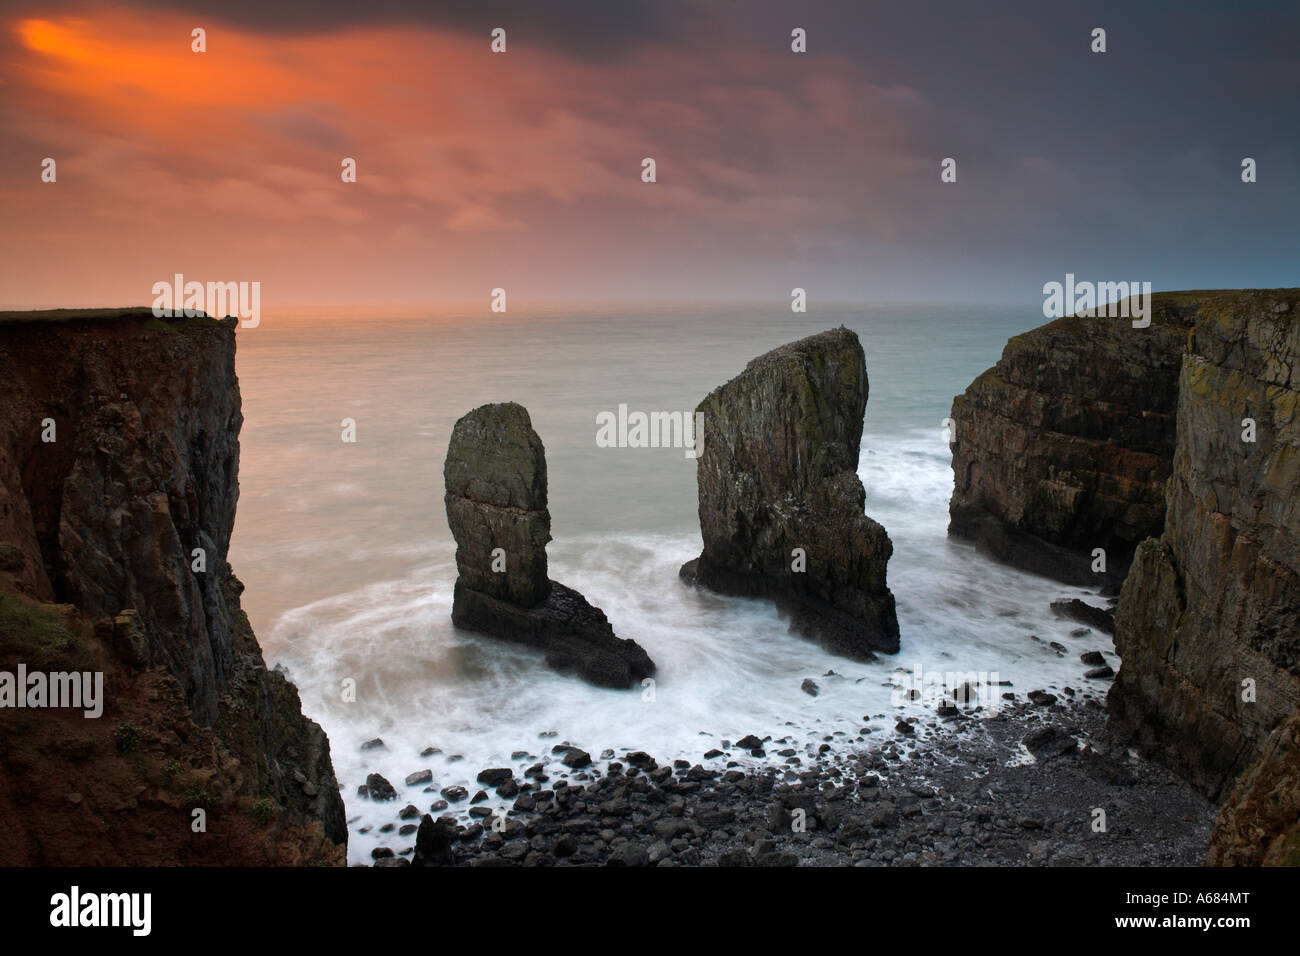 Massive rock stacks guarding the entrance to a secluded Pembrokeshire cove, Elegug, Wales Stock Photo